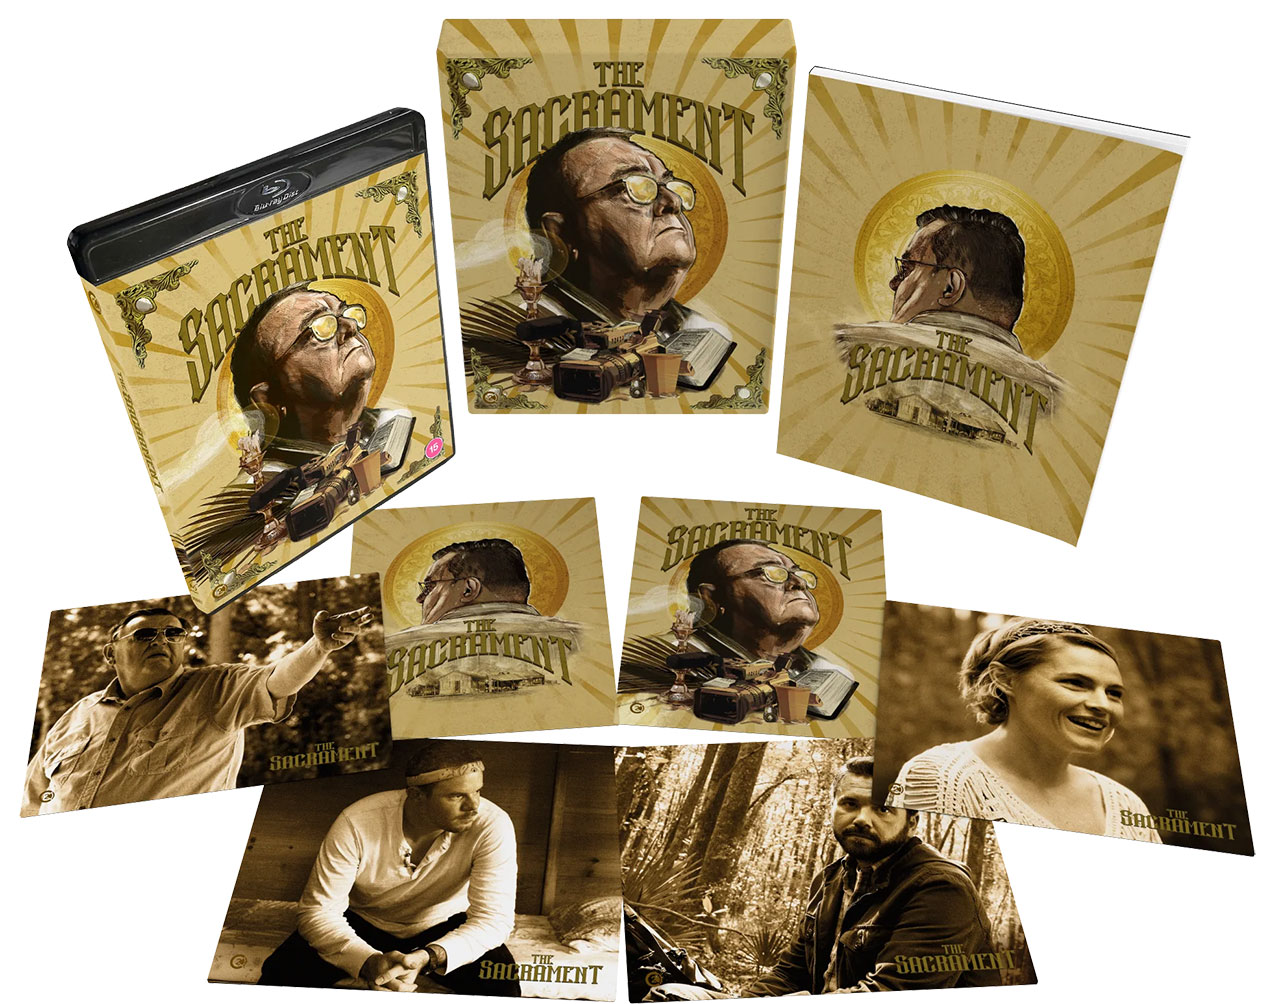 The Sacrement Limited Edition Blu-ray pack shot